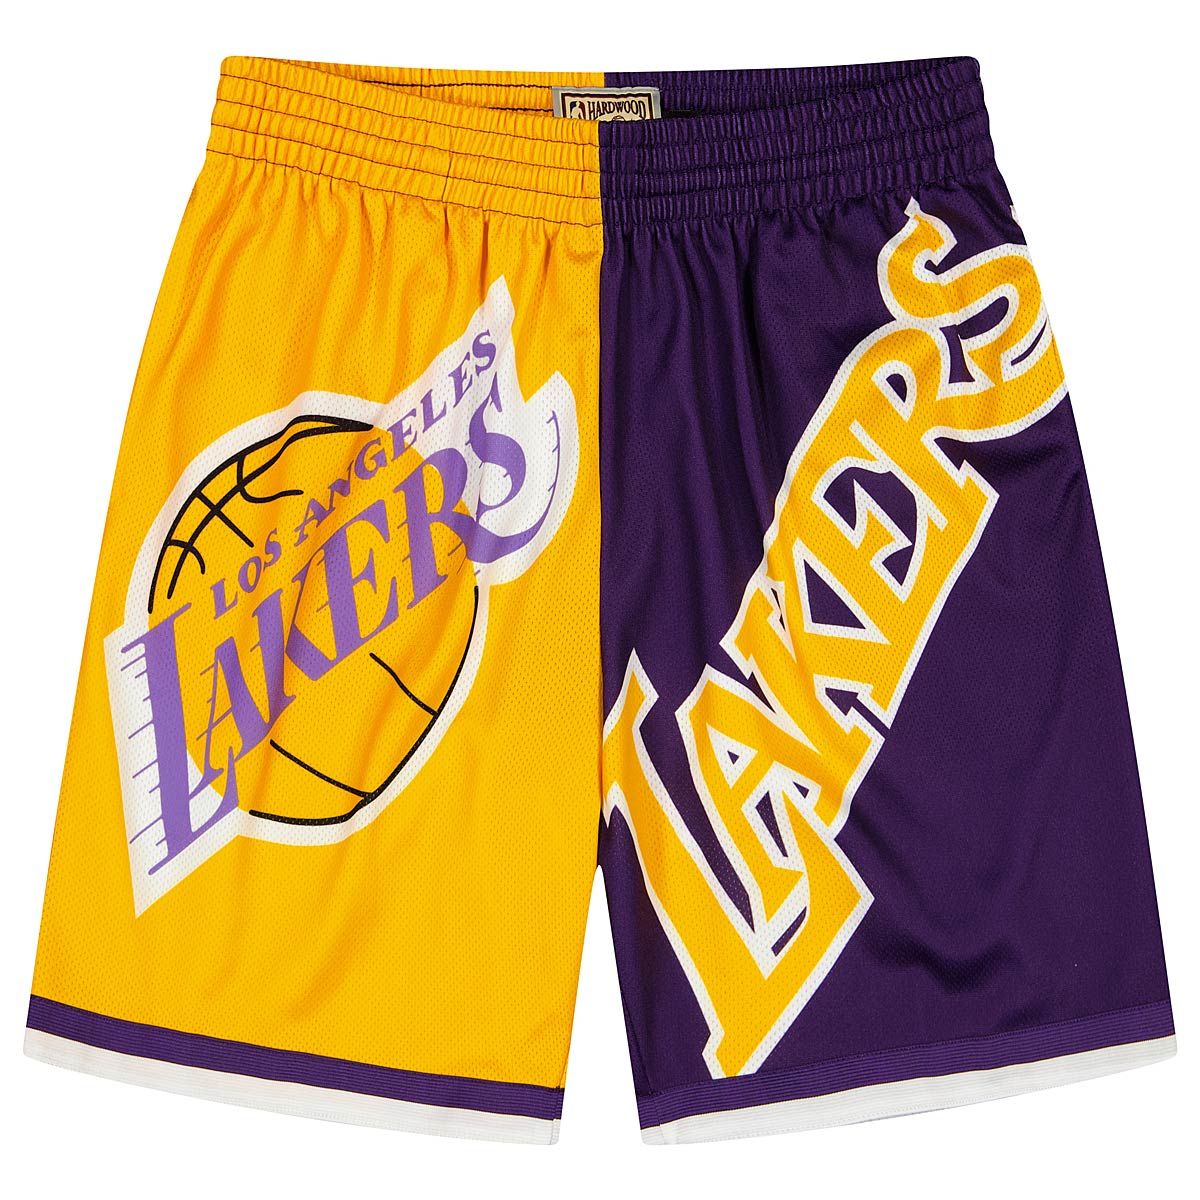 Mitchell And Ness Nba Los Angeles Lakers Big Face Fashion Shorts 5.0, Yellow